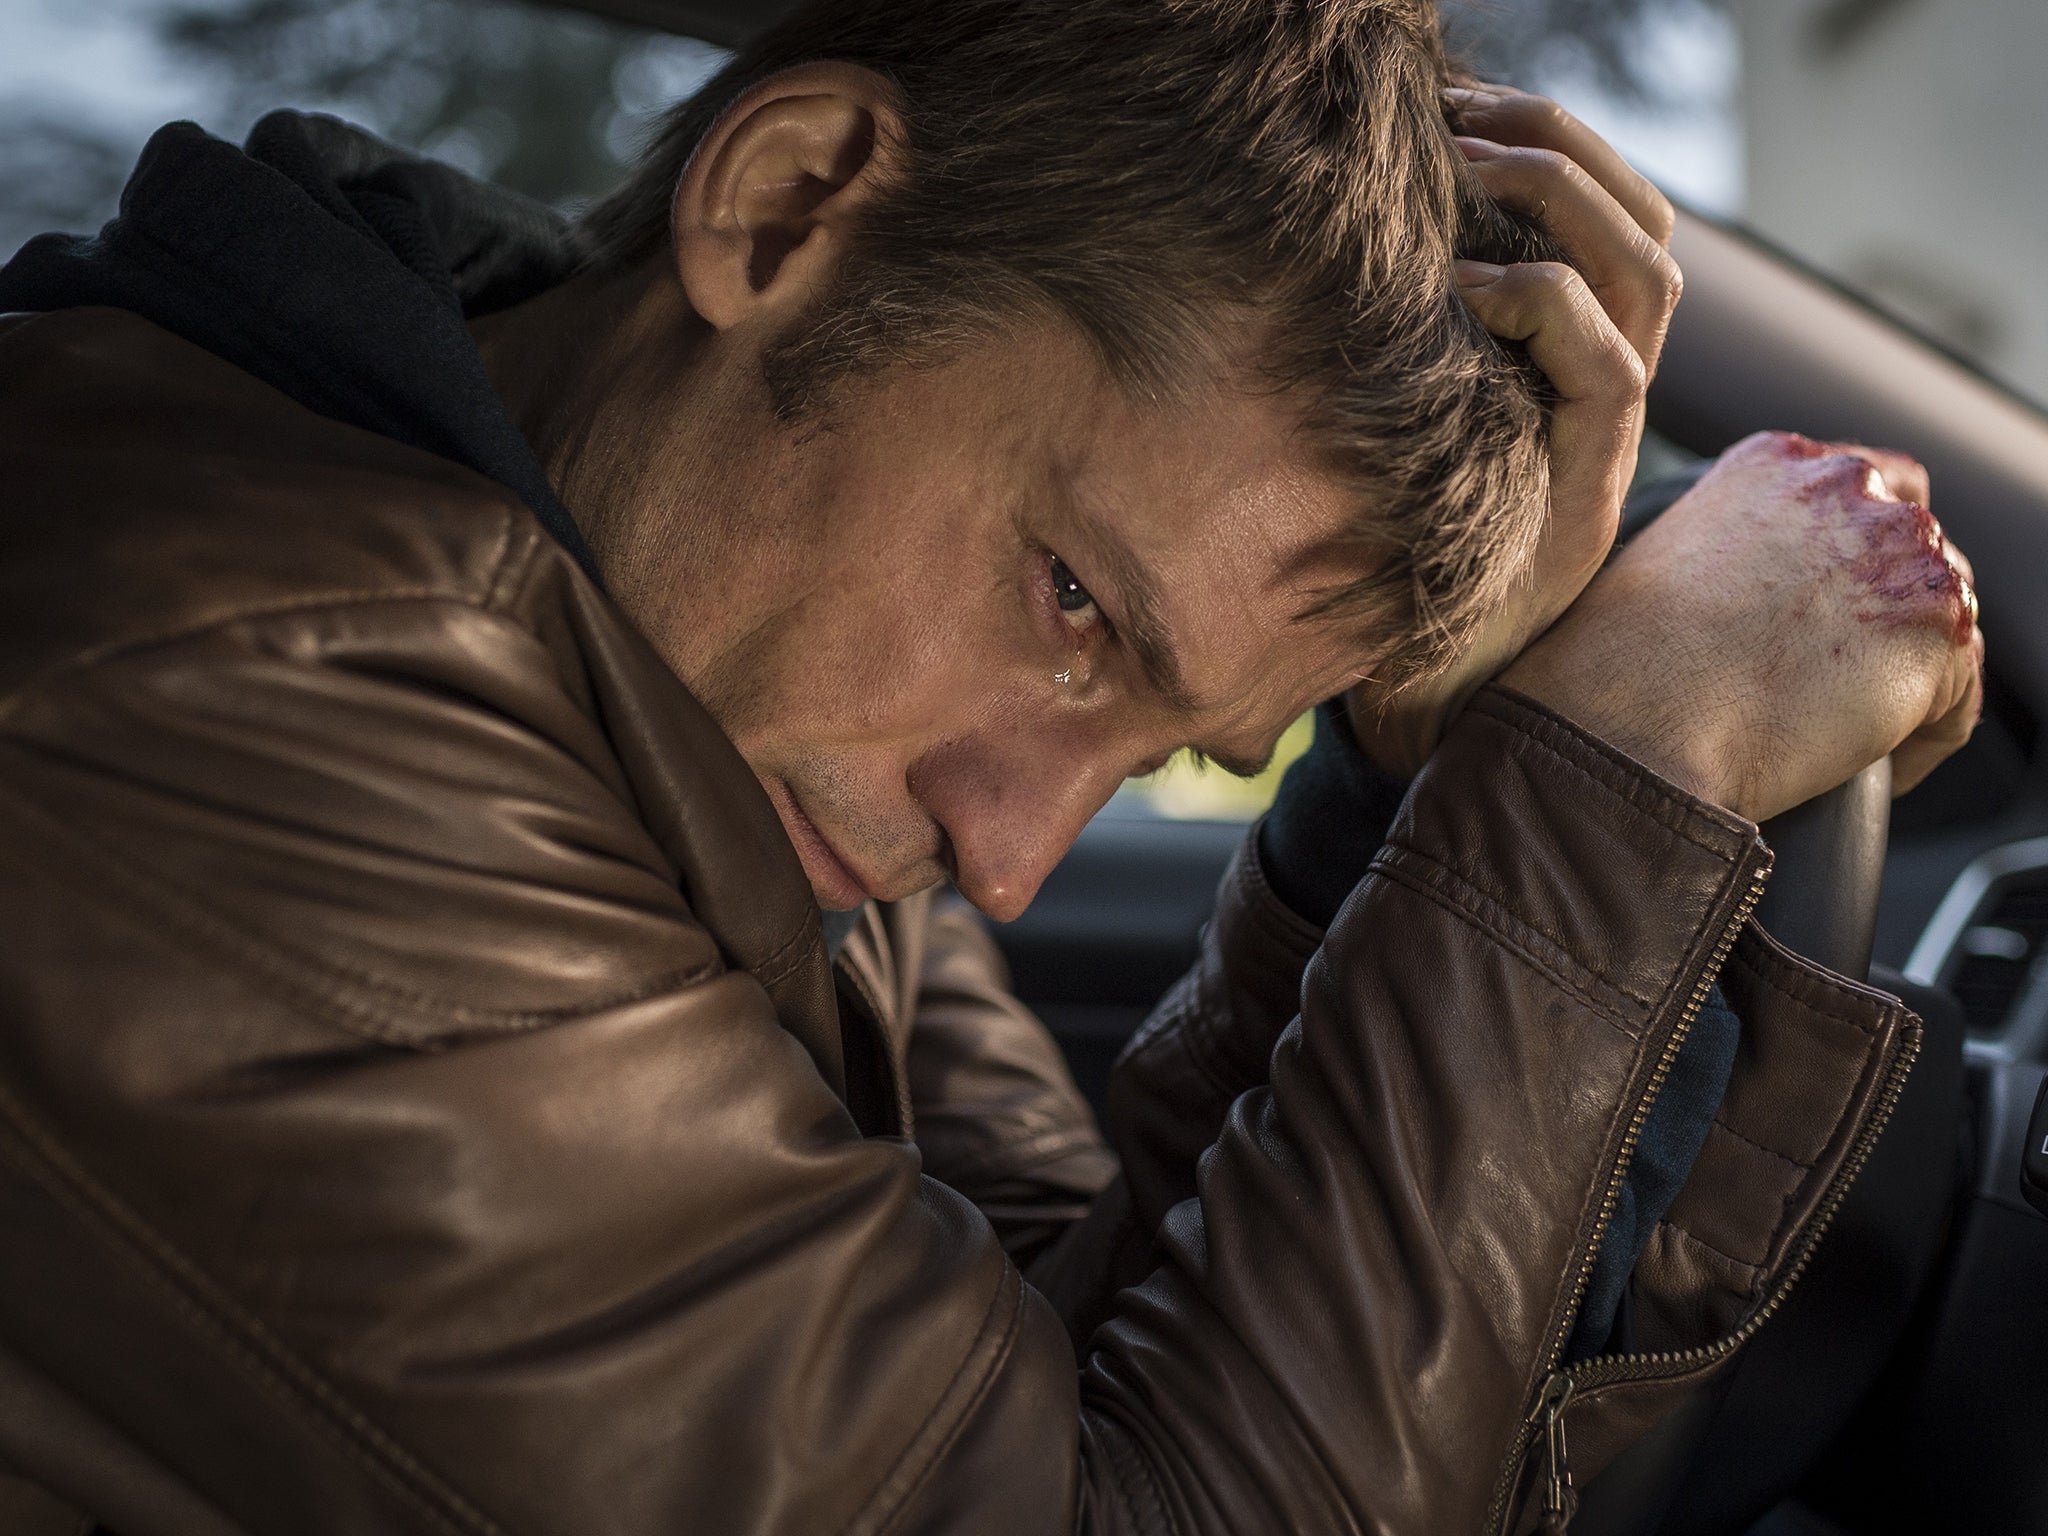 A Second Chance: a crude and clumsy melodrama
starring Game of Thrones actor Nikolaj Coster-Waldau